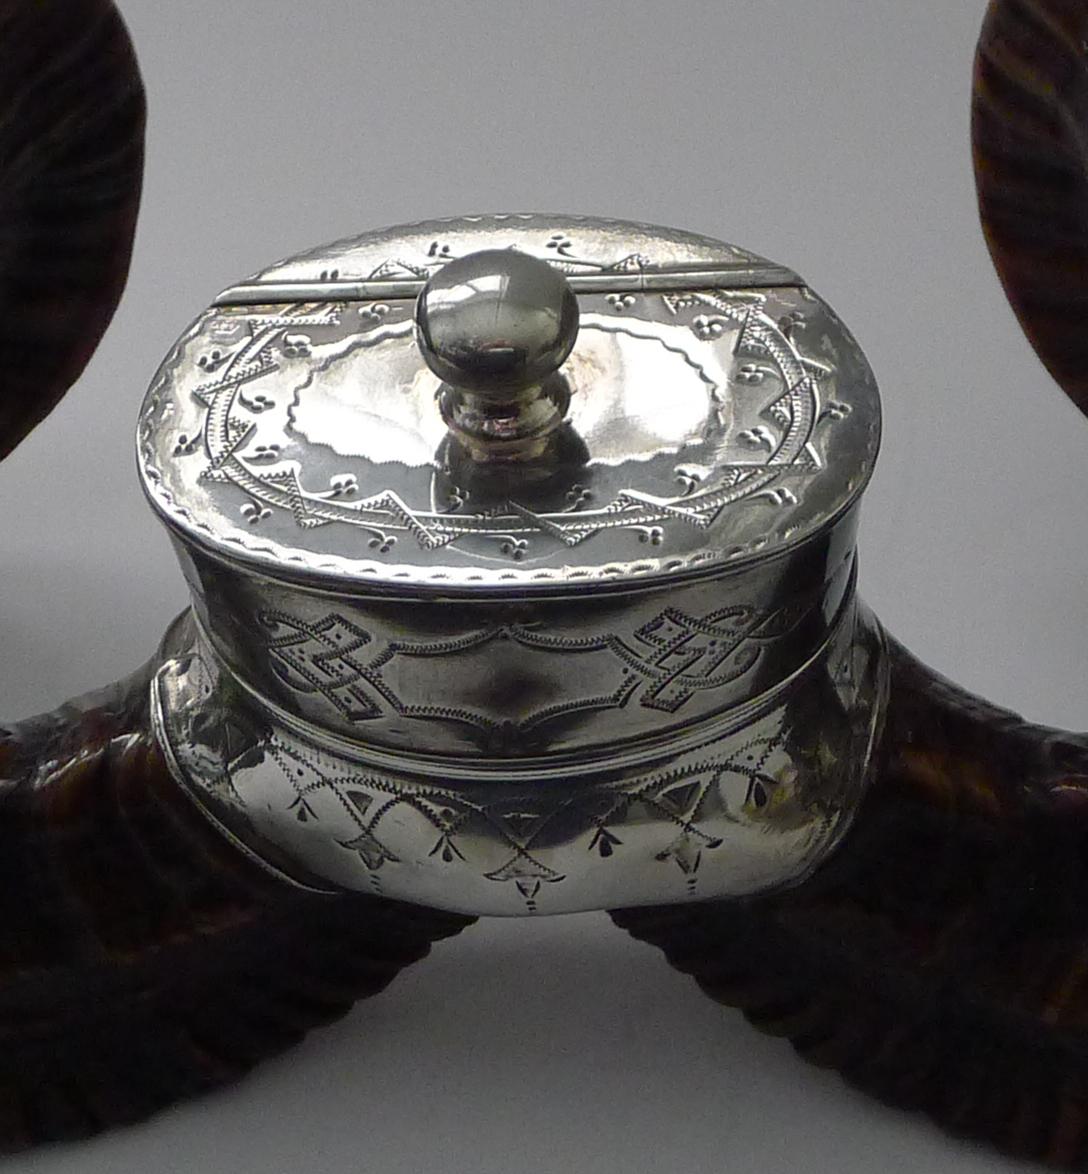 A very grand table-top snuff box which would have stood in a very grand home, made from a large Ram's horn with silver plated fittings including two bun feet.

The central snuff box is beautifully engraved. An impressive piece and an impressive